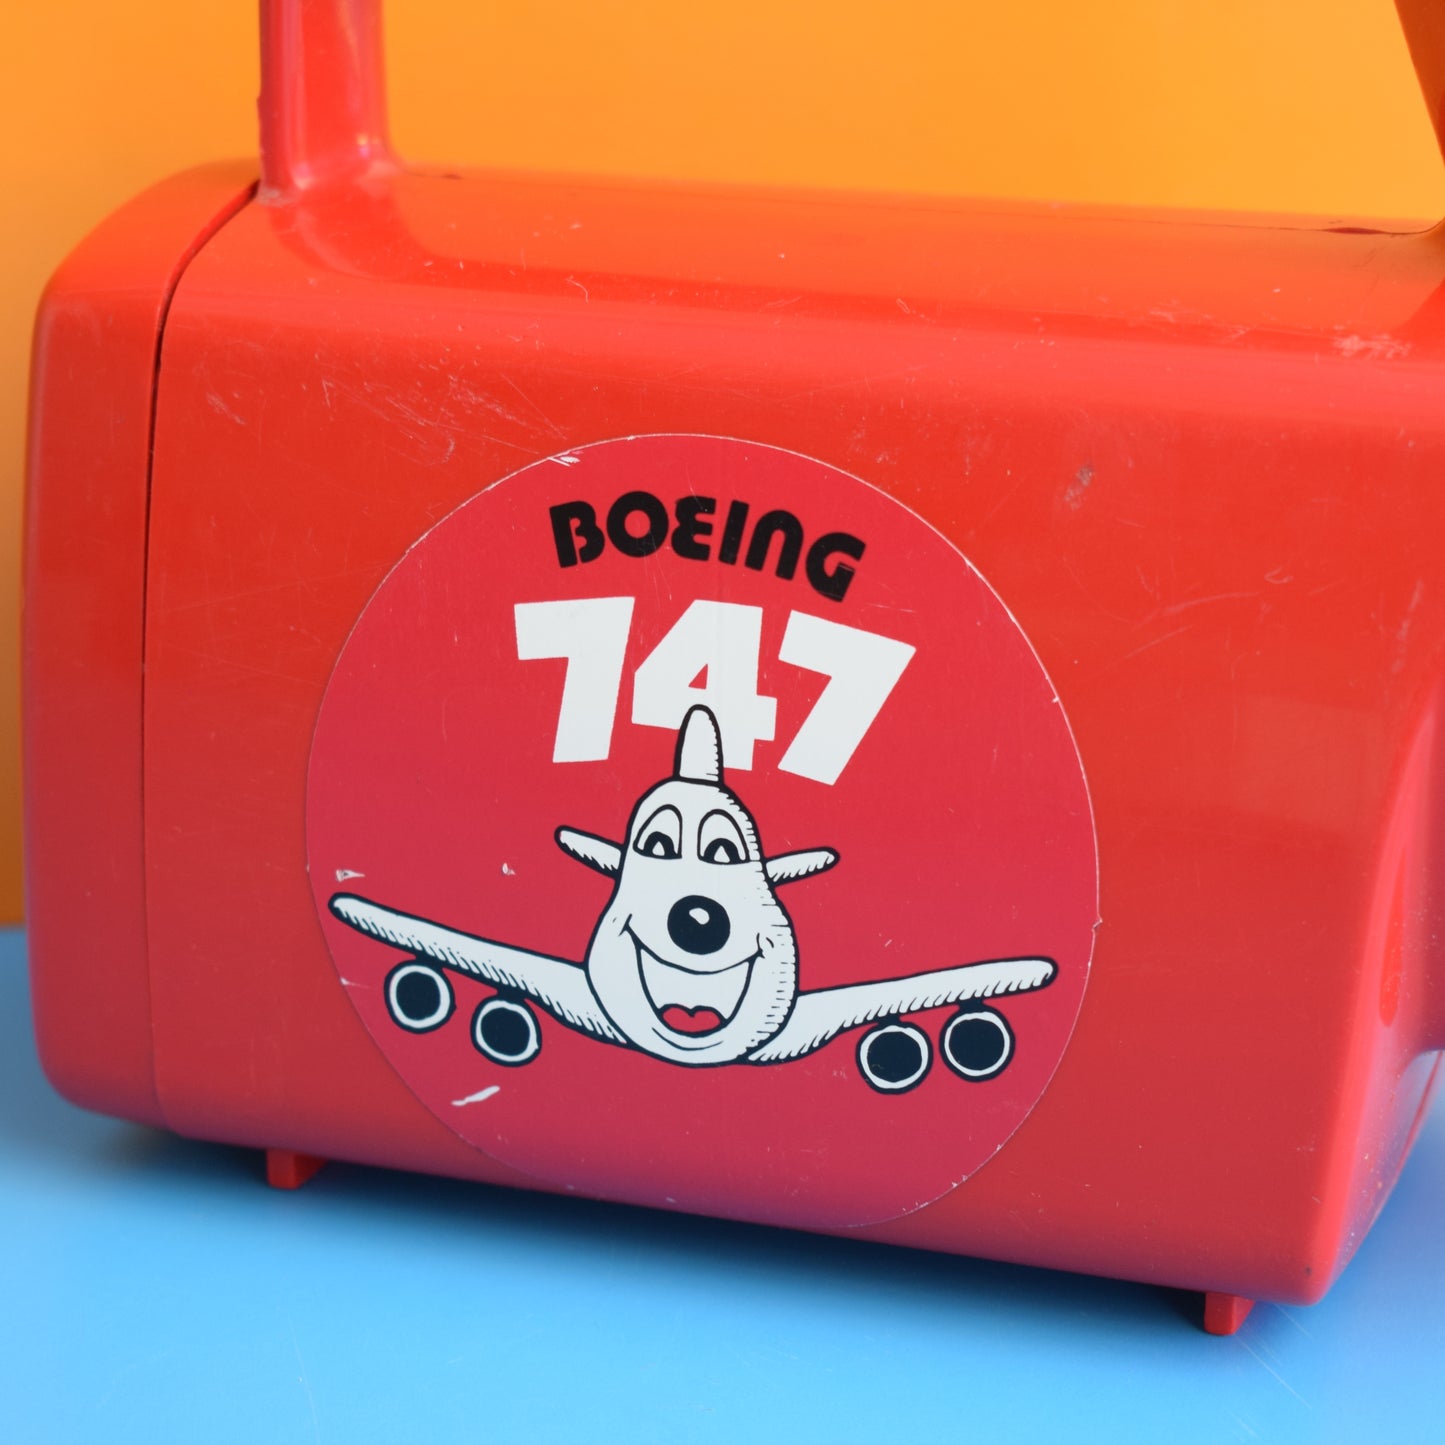 Vintage 1970s Eveready Torch- Boeing 747